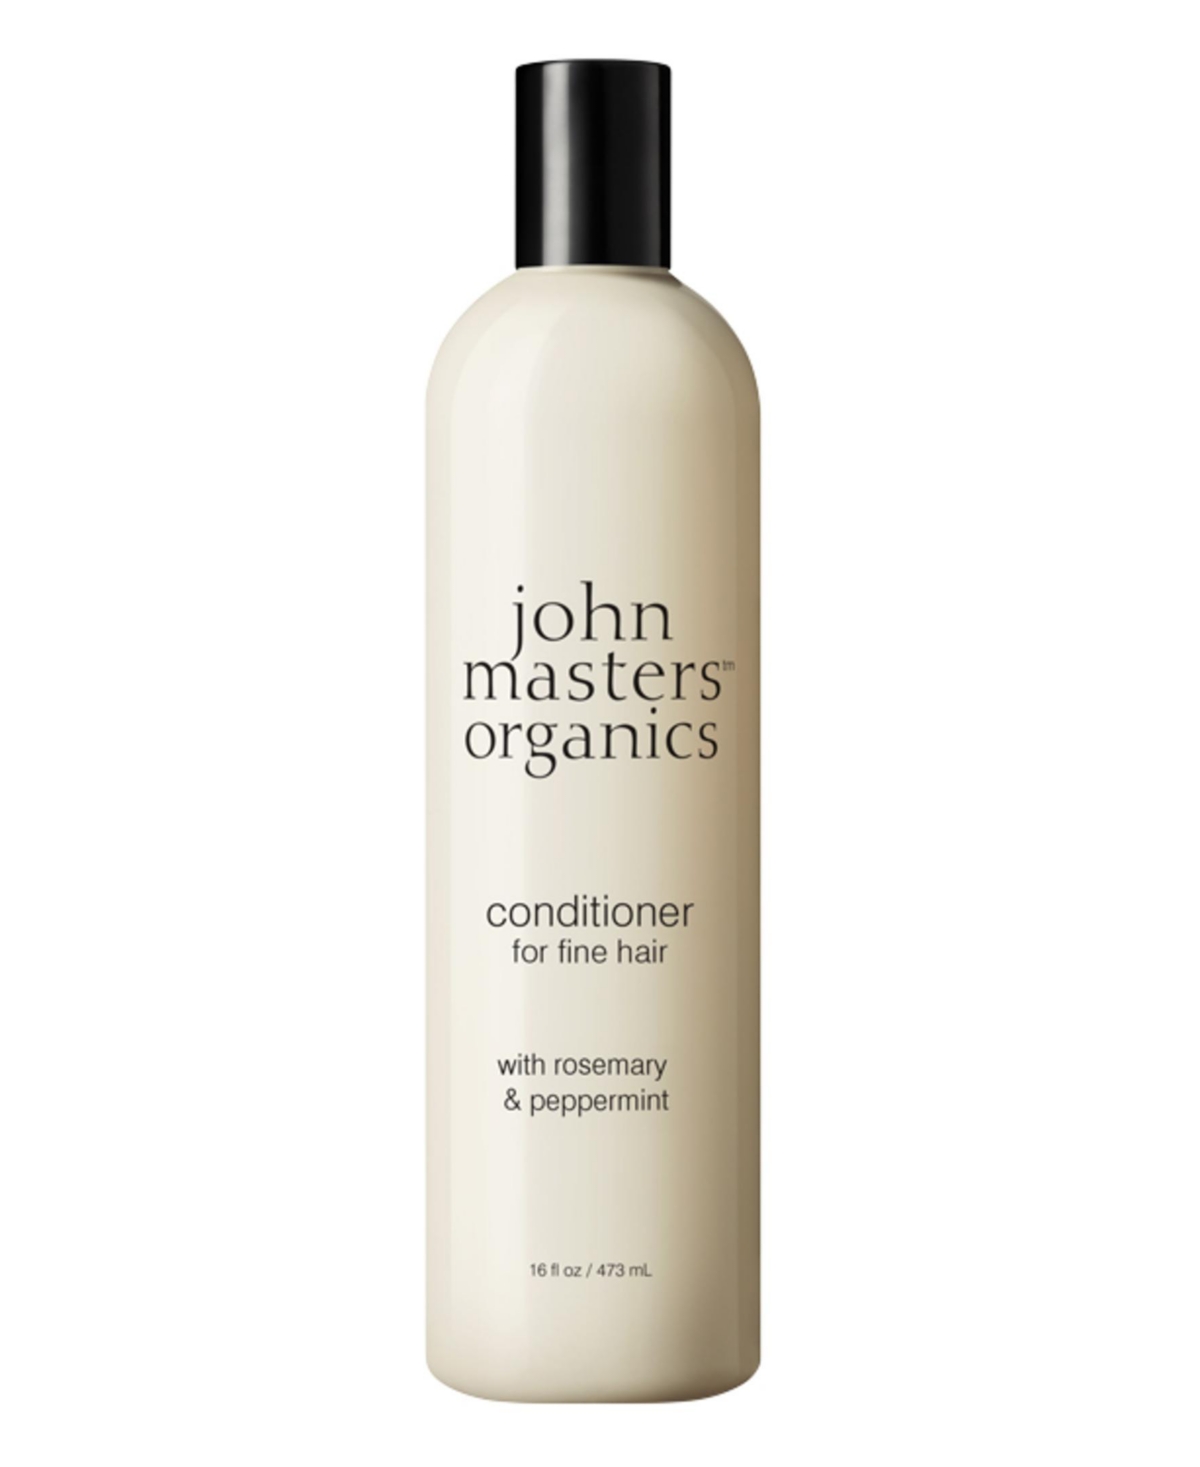 Conditioner For Fine Hair With Rosemary & Peppermint, 16 oz.